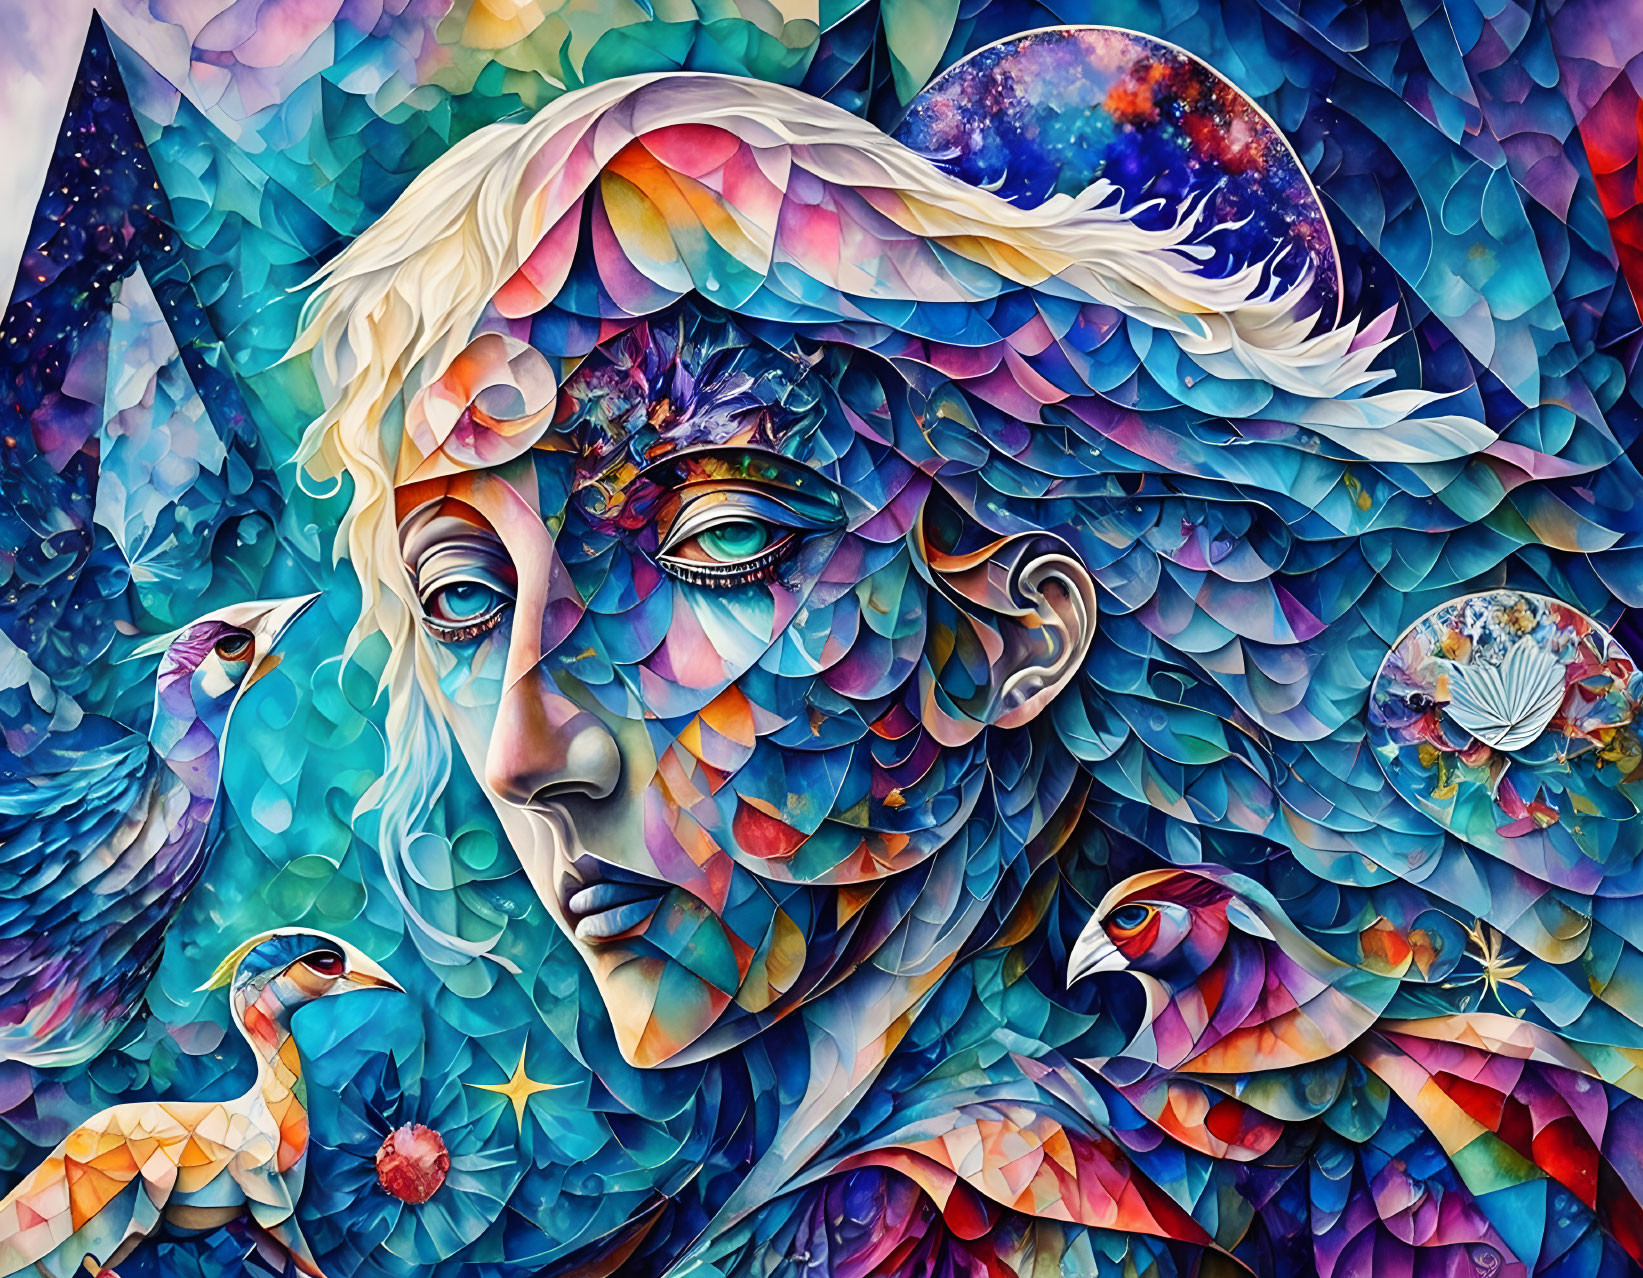 Colorful Mosaic Artwork of Woman's Face with Celestial Motifs and Birds